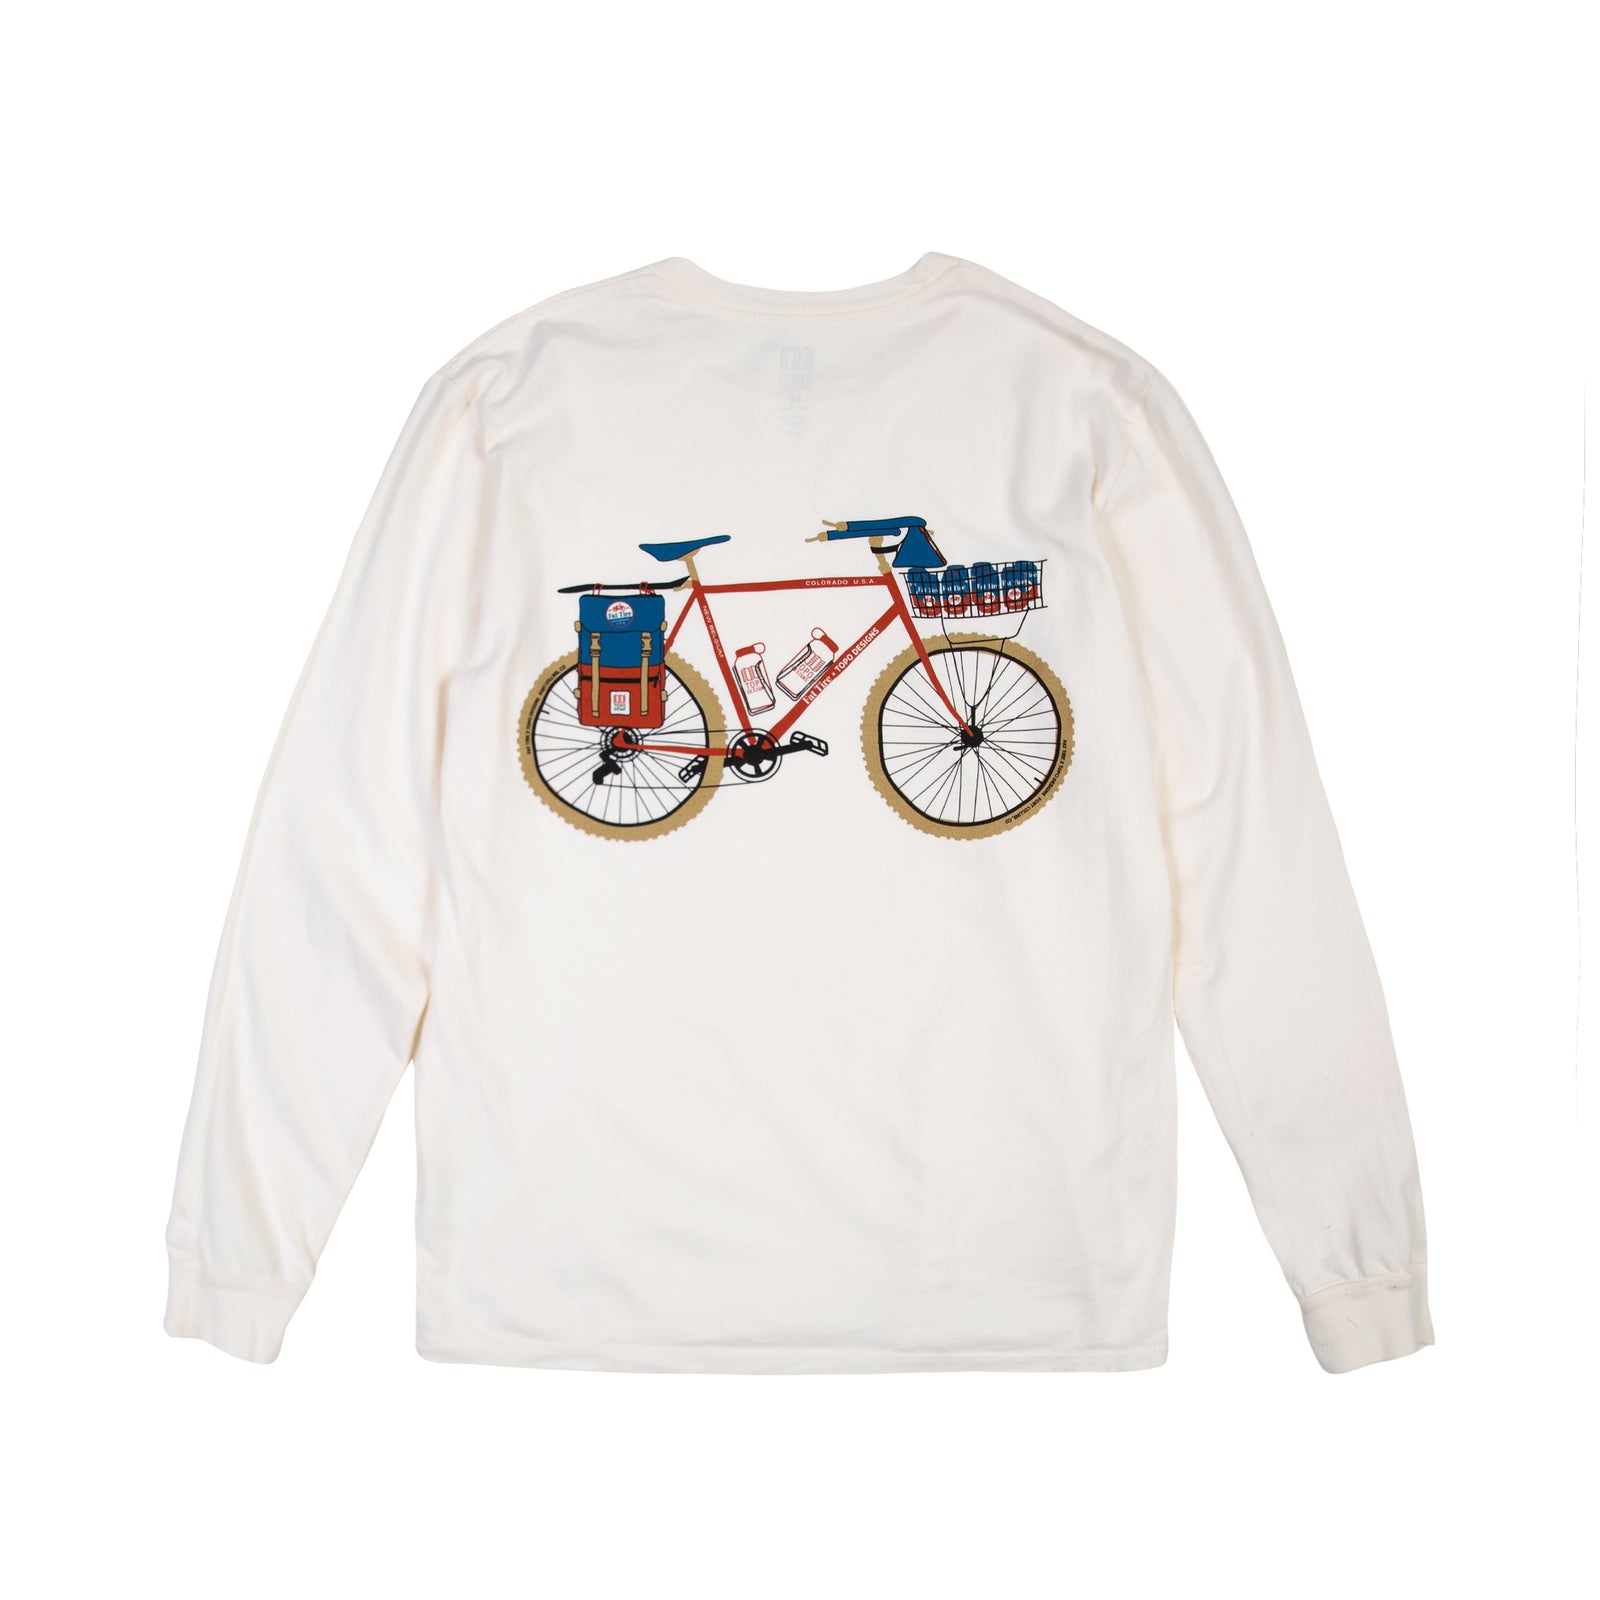 Back bike graphic on Topo Designs x New Belgium Fat Tire Men's Long Sleeve T-Shirt in Natural white.